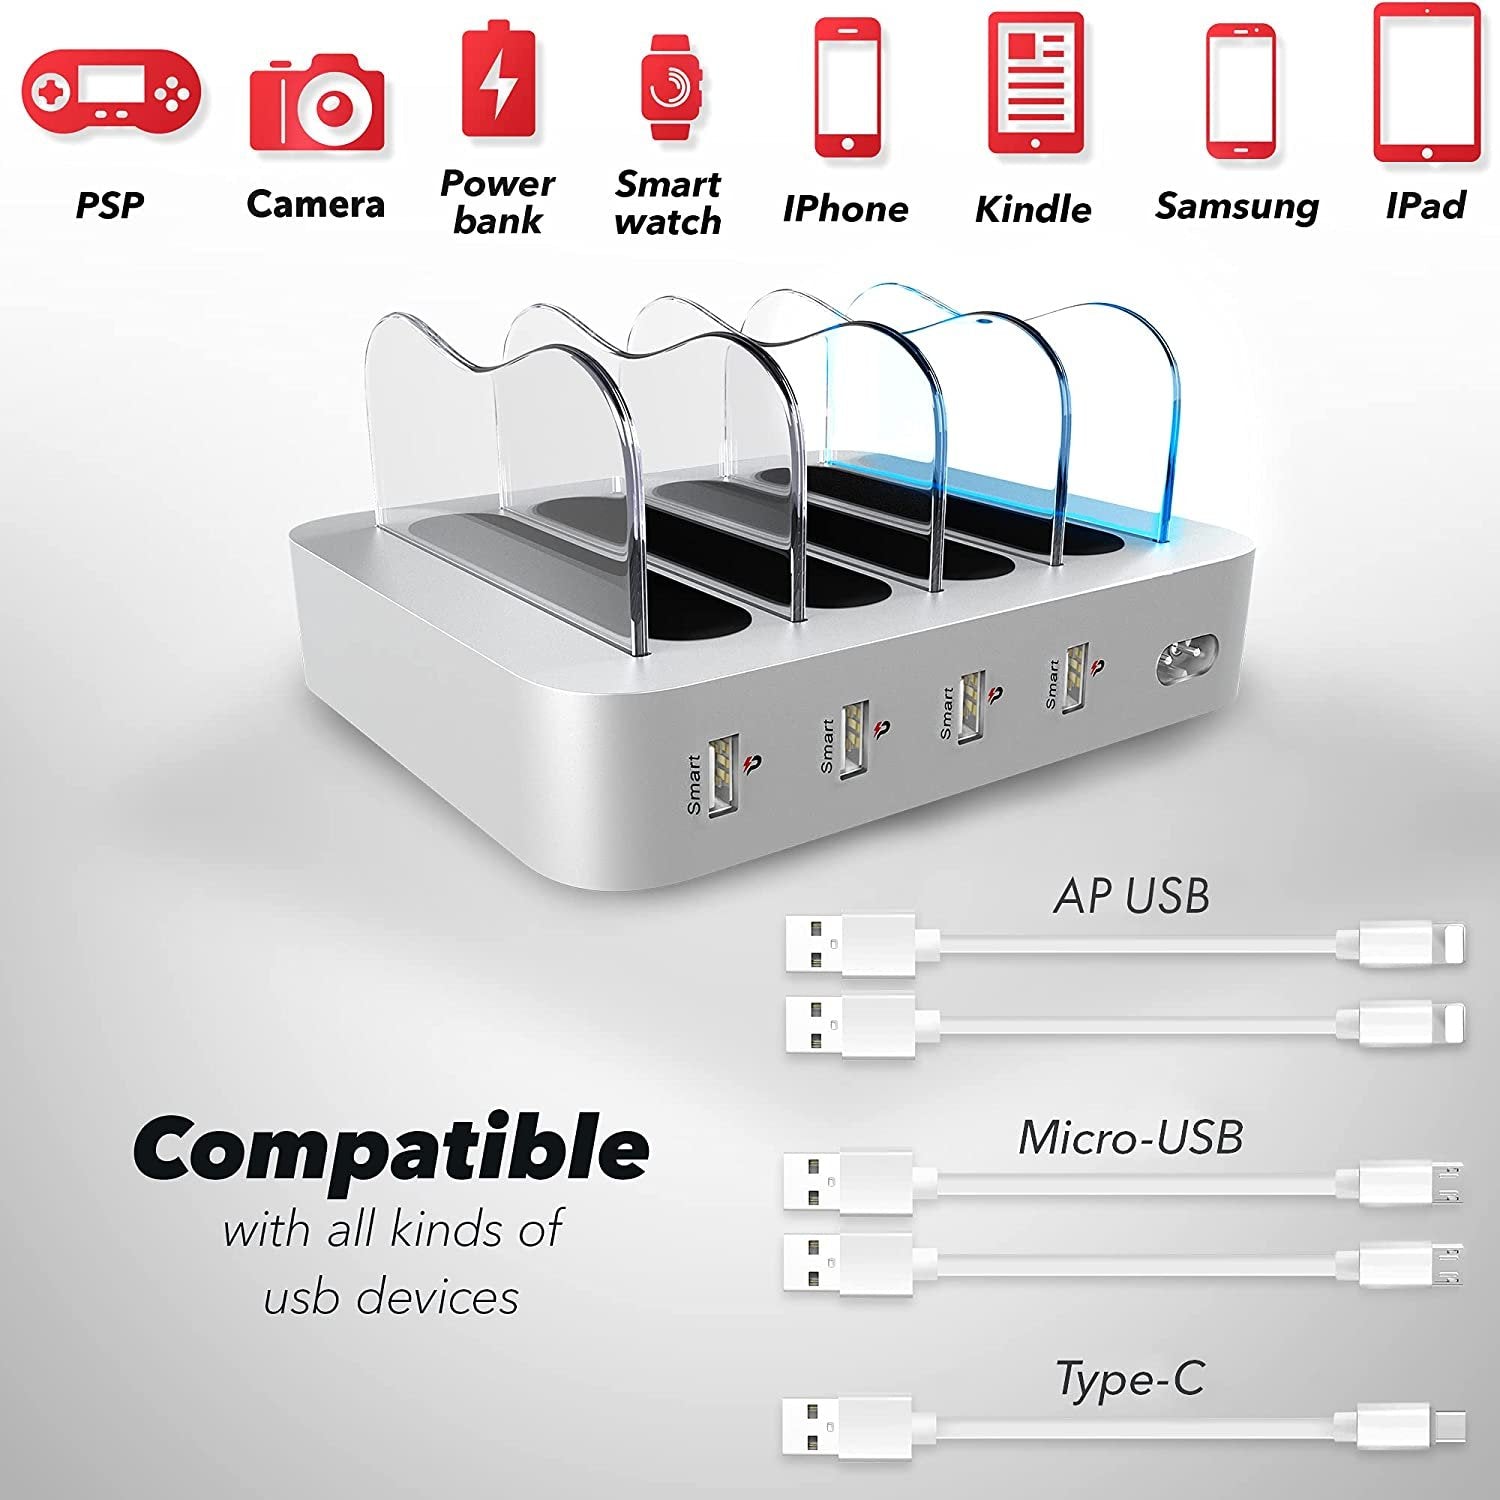 Poweroni Fast Charge USB Charging Station for Multiple Devices - Silver 4-Port - Includes 5 Cables - Fits Phones/Tablets - 6.1 x 4.9 x 1.1 inches